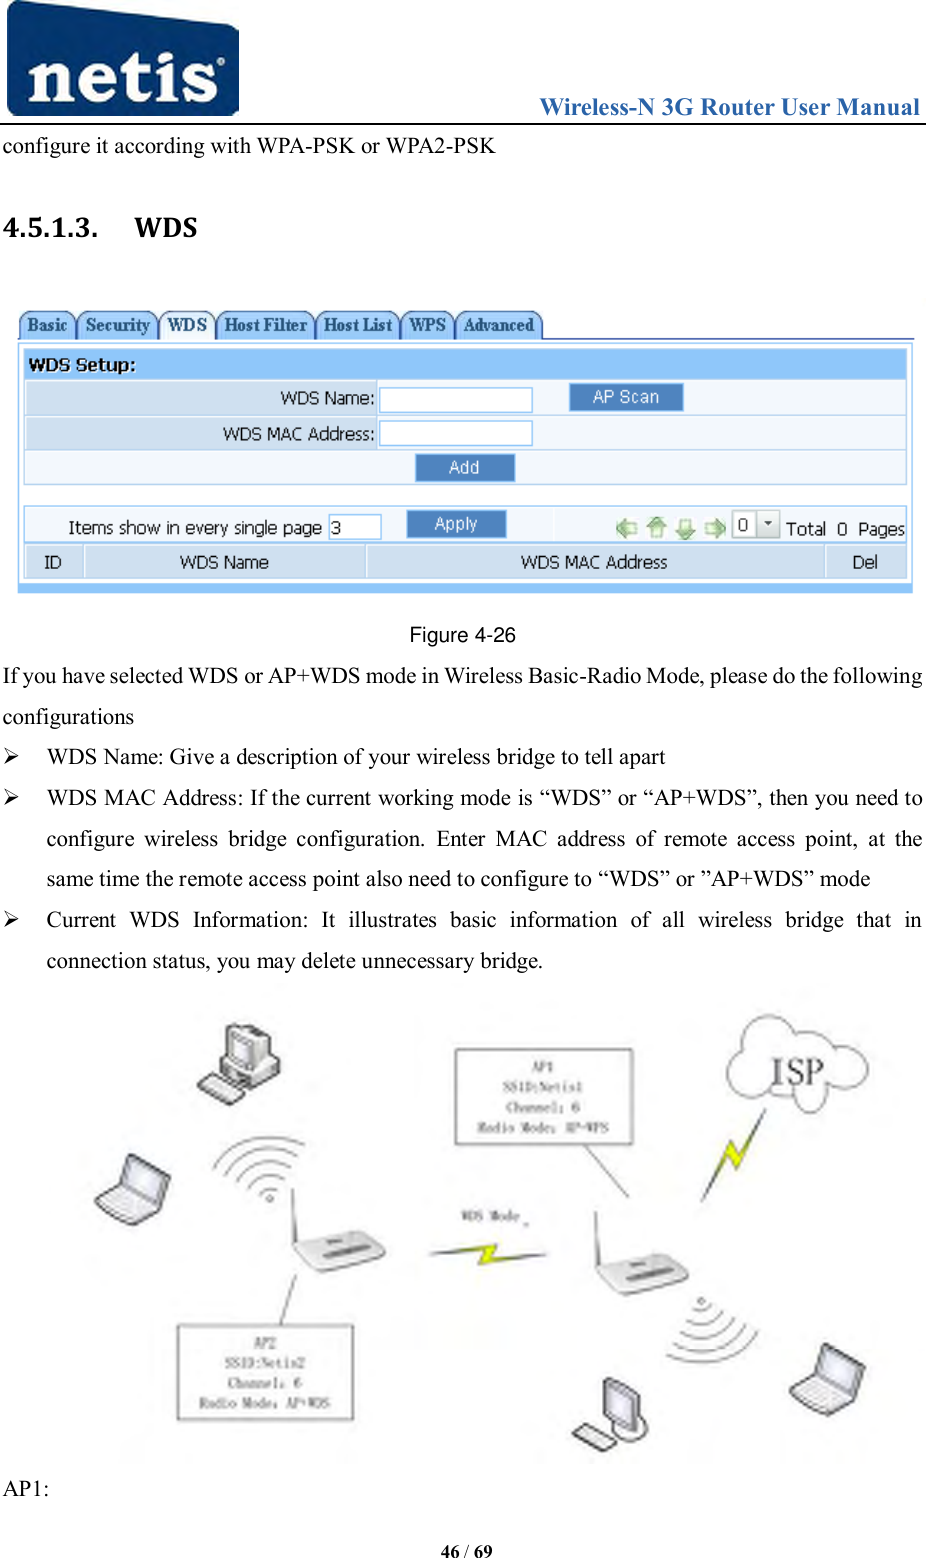                                 Wireless-N 3G Router User Manual  46 / 69 configure it according with WPA-PSK or WPA2-PSK 4.5.1.3. WDS  Figure 4-26 If you have selected WDS or AP+WDS mode in Wireless Basic-Radio Mode, please do the following configurations  WDS Name: Give a description of your wireless bridge to tell apart  WDS MAC Address: If the current working mode is “WDS” or “AP+WDS”, then you need to configure  wireless  bridge  configuration.  Enter  MAC address  of  remote  access  point,  at  the same time the remote access point also need to configure to “WDS” or ”AP+WDS” mode  Current  WDS  Information:  It  illustrates  basic  information  of  all  wireless  bridge  that  in connection status, you may delete unnecessary bridge.  AP1:   